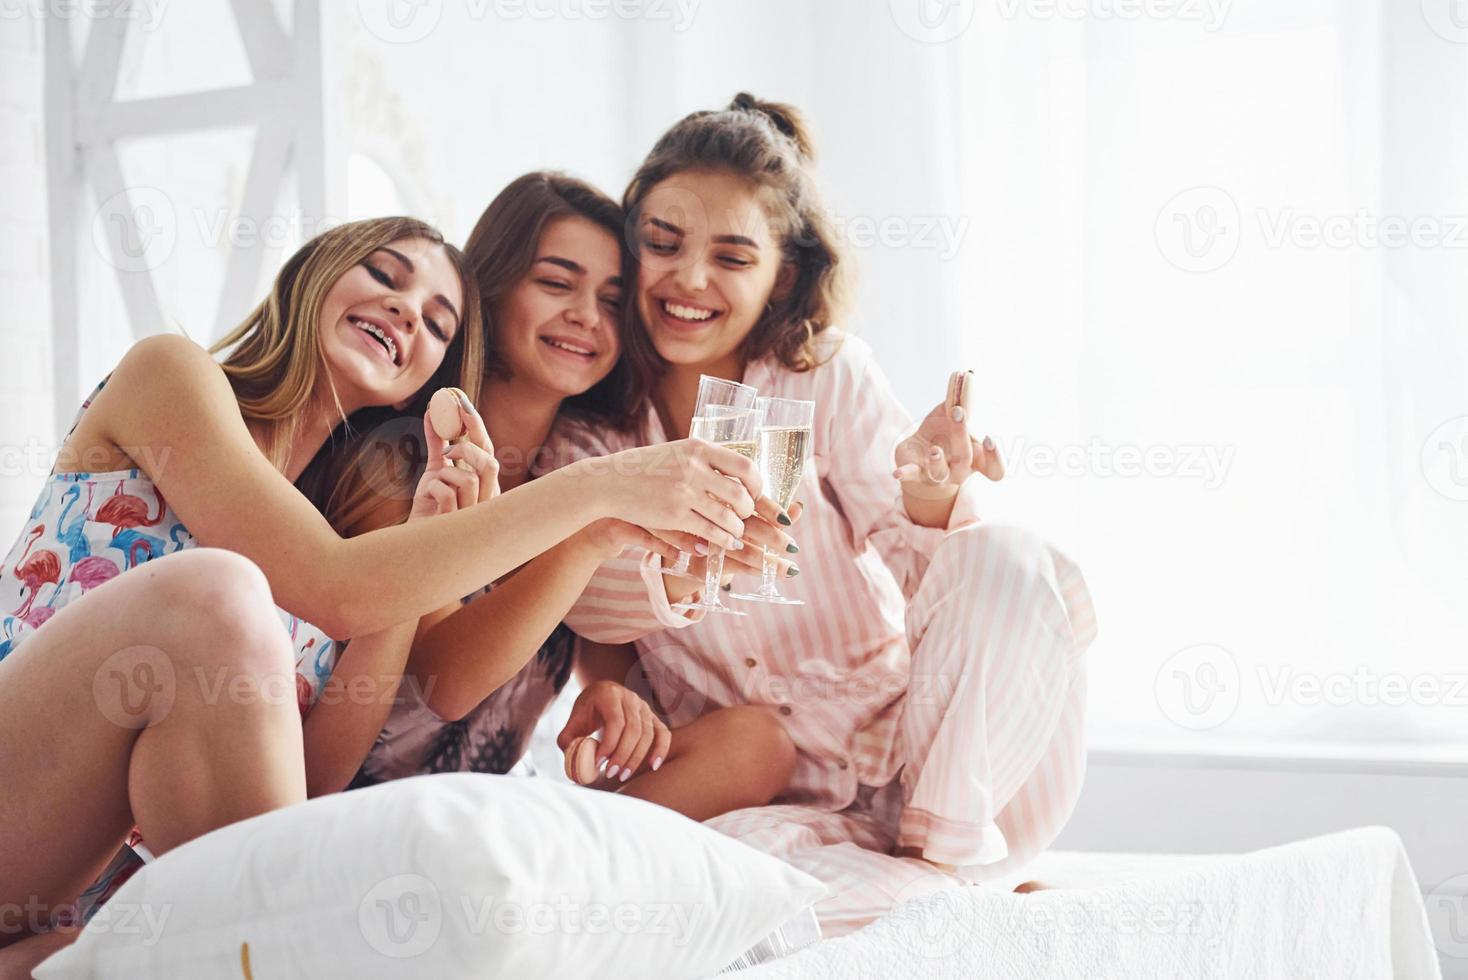 Celebrating with glasses of alcohol in hands. Happy female friends having good time at pajama party in the bedroom photo